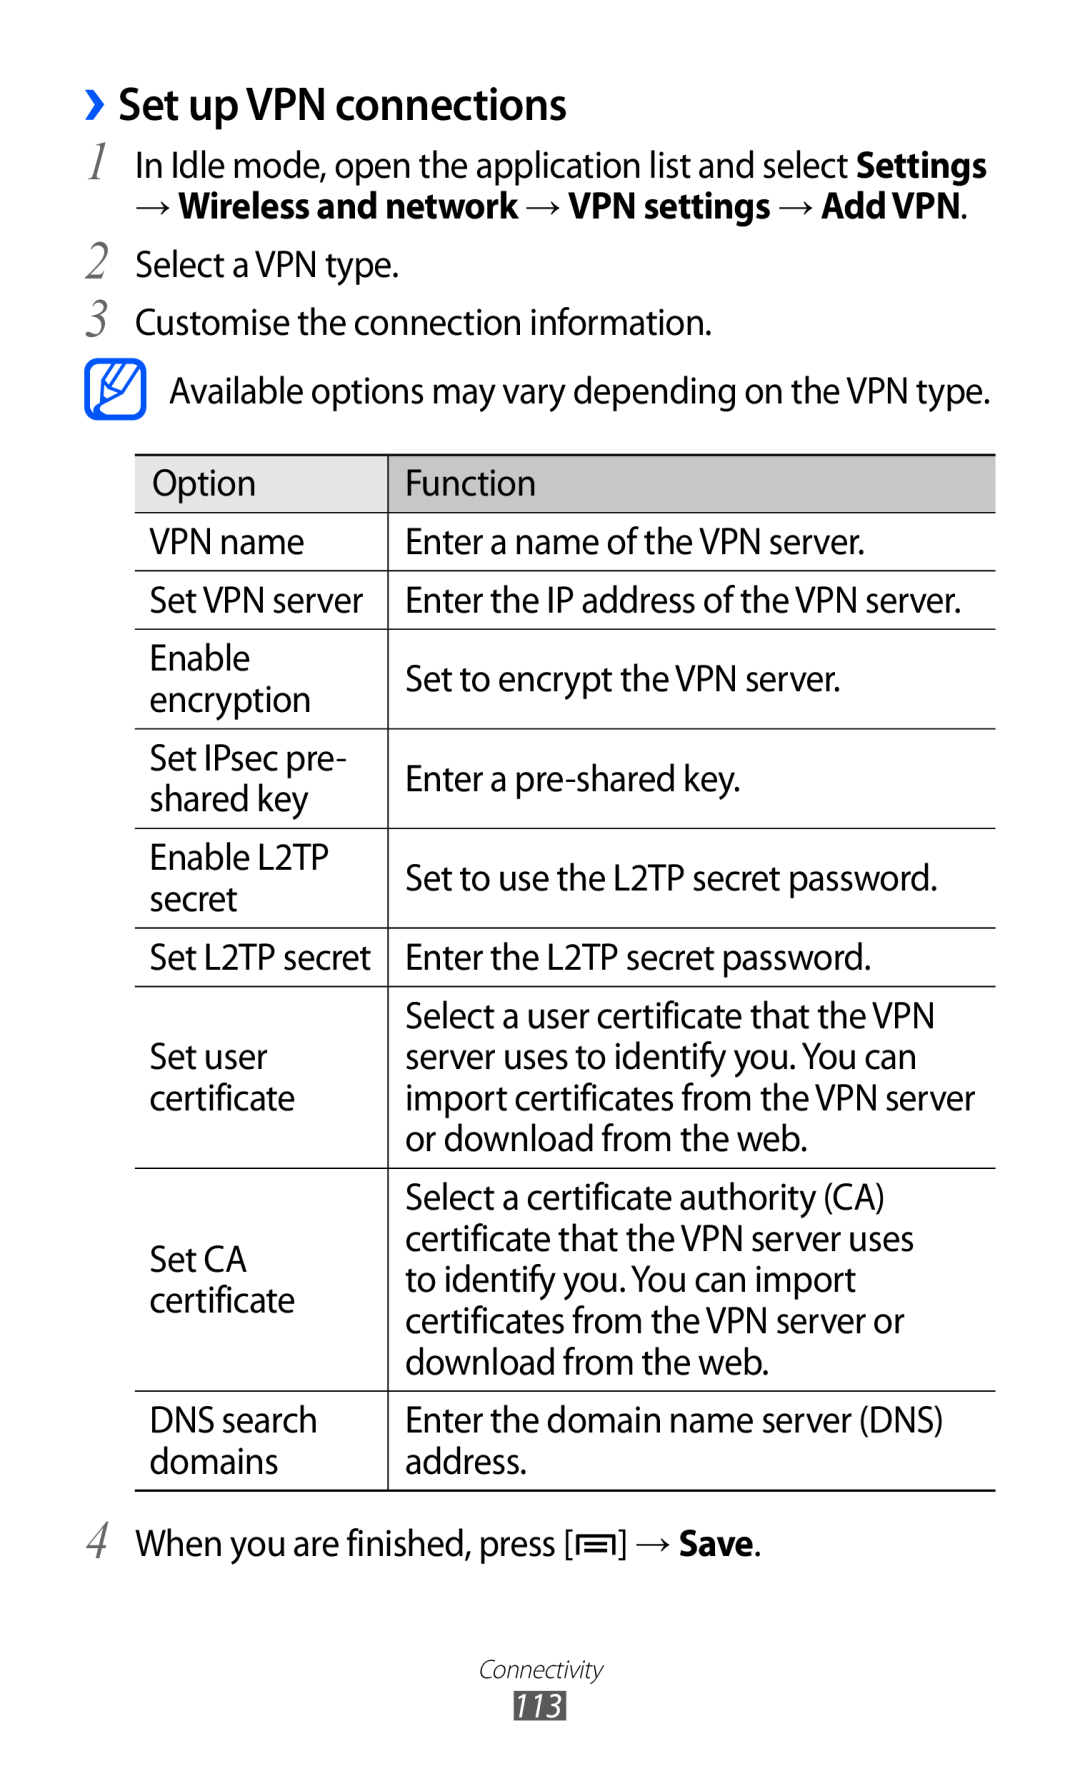 Samsung GT-I9070 user manual ››Set up VPN connections, → Wireless and network → VPN settings → Add VPN 